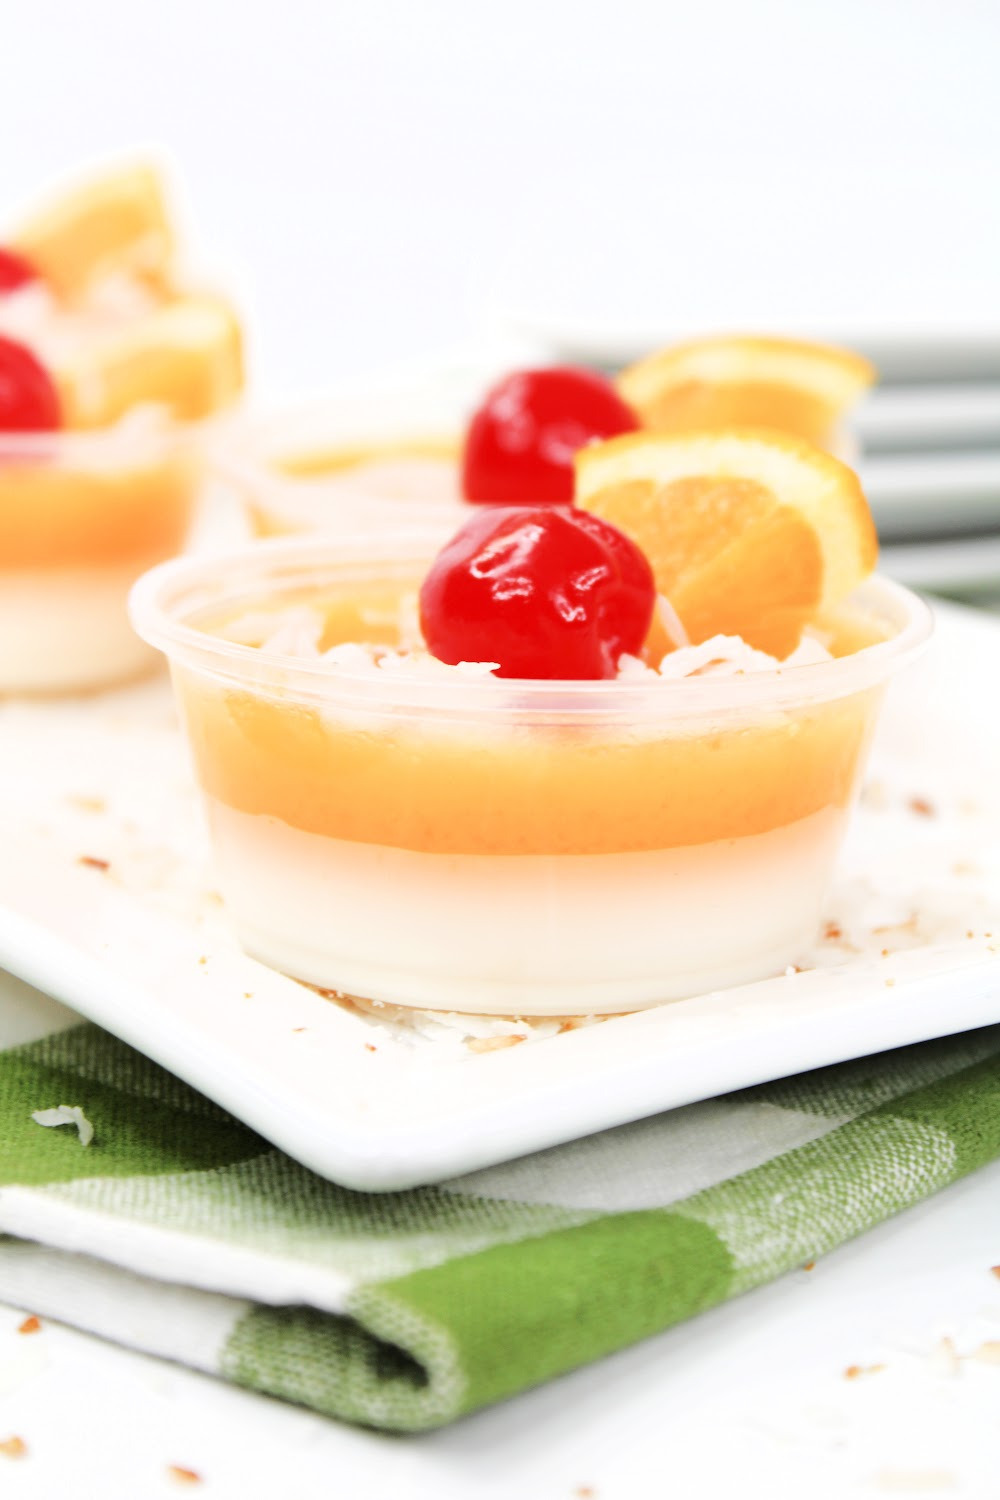 A close up of Pina Colada jello shots served on a white plate with a green checked napkin.